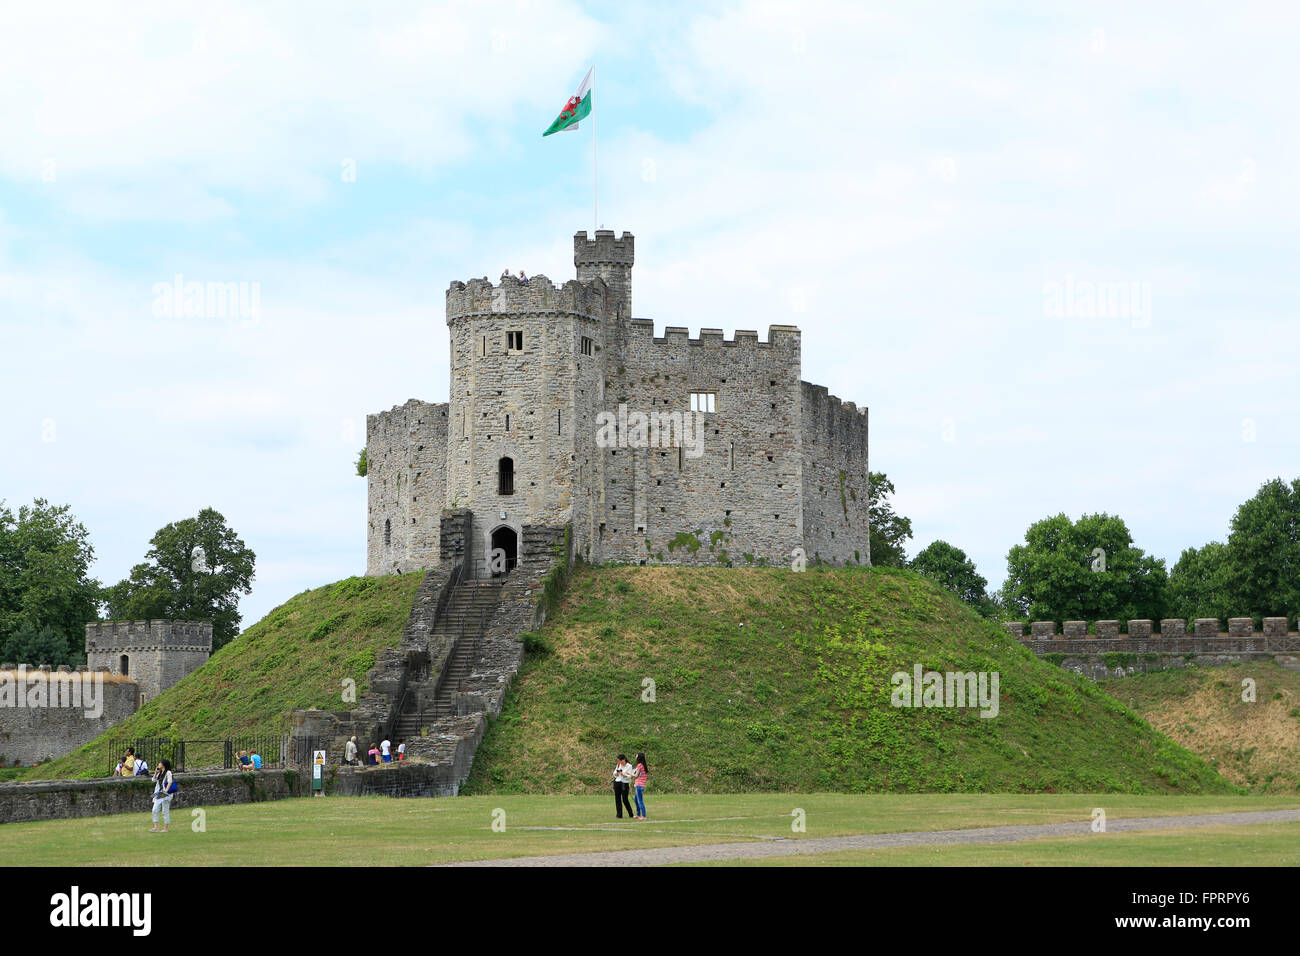 Europe, United Kingdom, Wales, Cardiff, 11th Century Norman keep and motte at Cardiff castle, Welsh flag flying Stock Photo